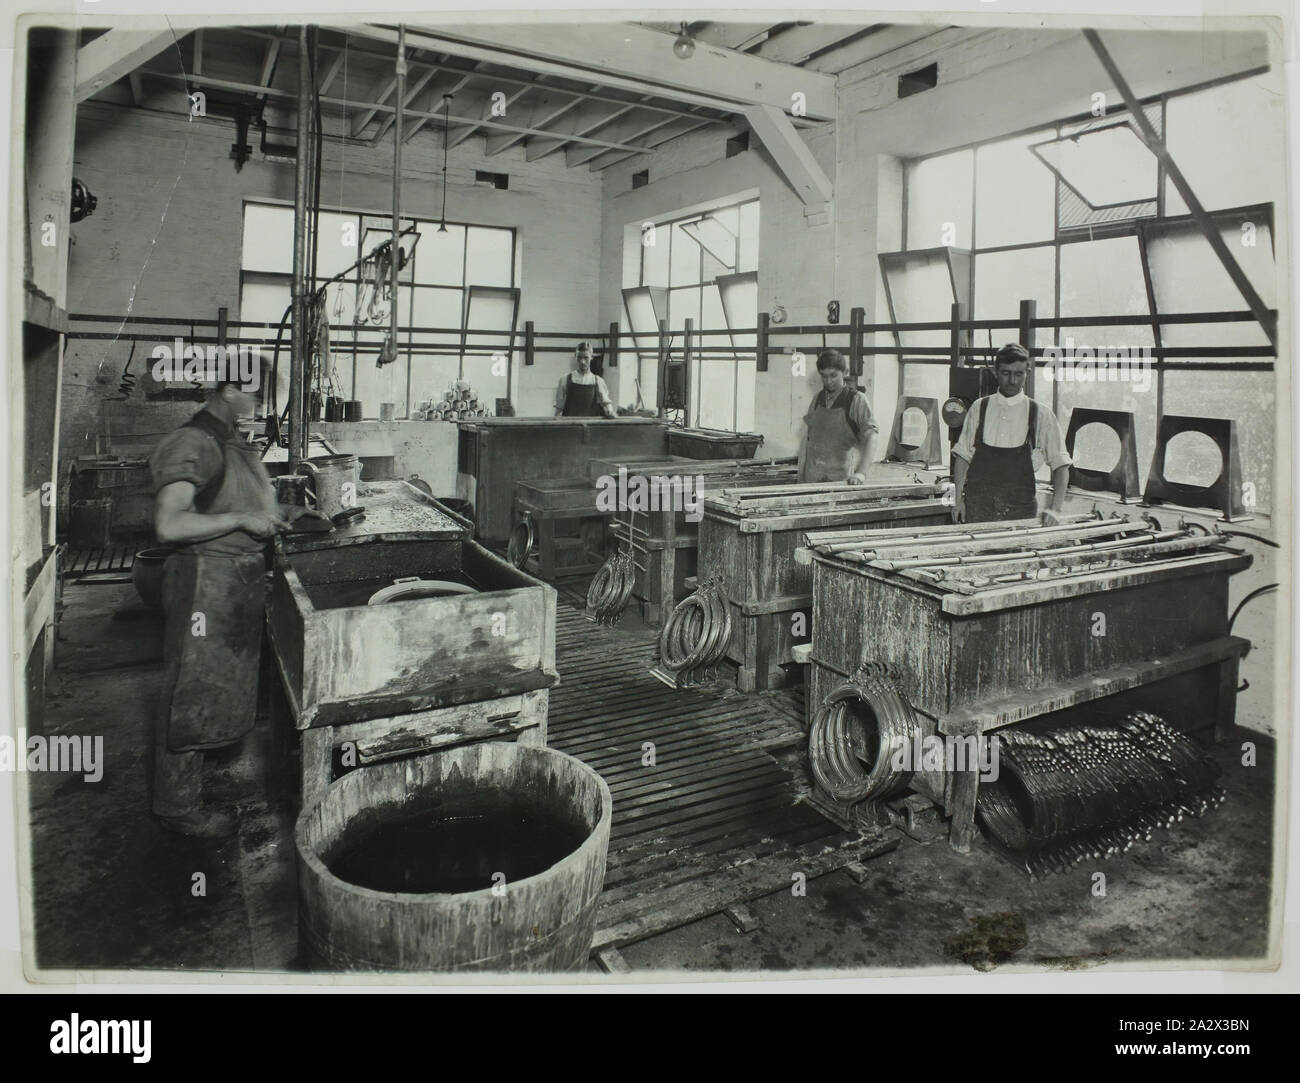 Photograph - Hecla Electrics Pty Ltd, Workers Shaping Metal Components ...